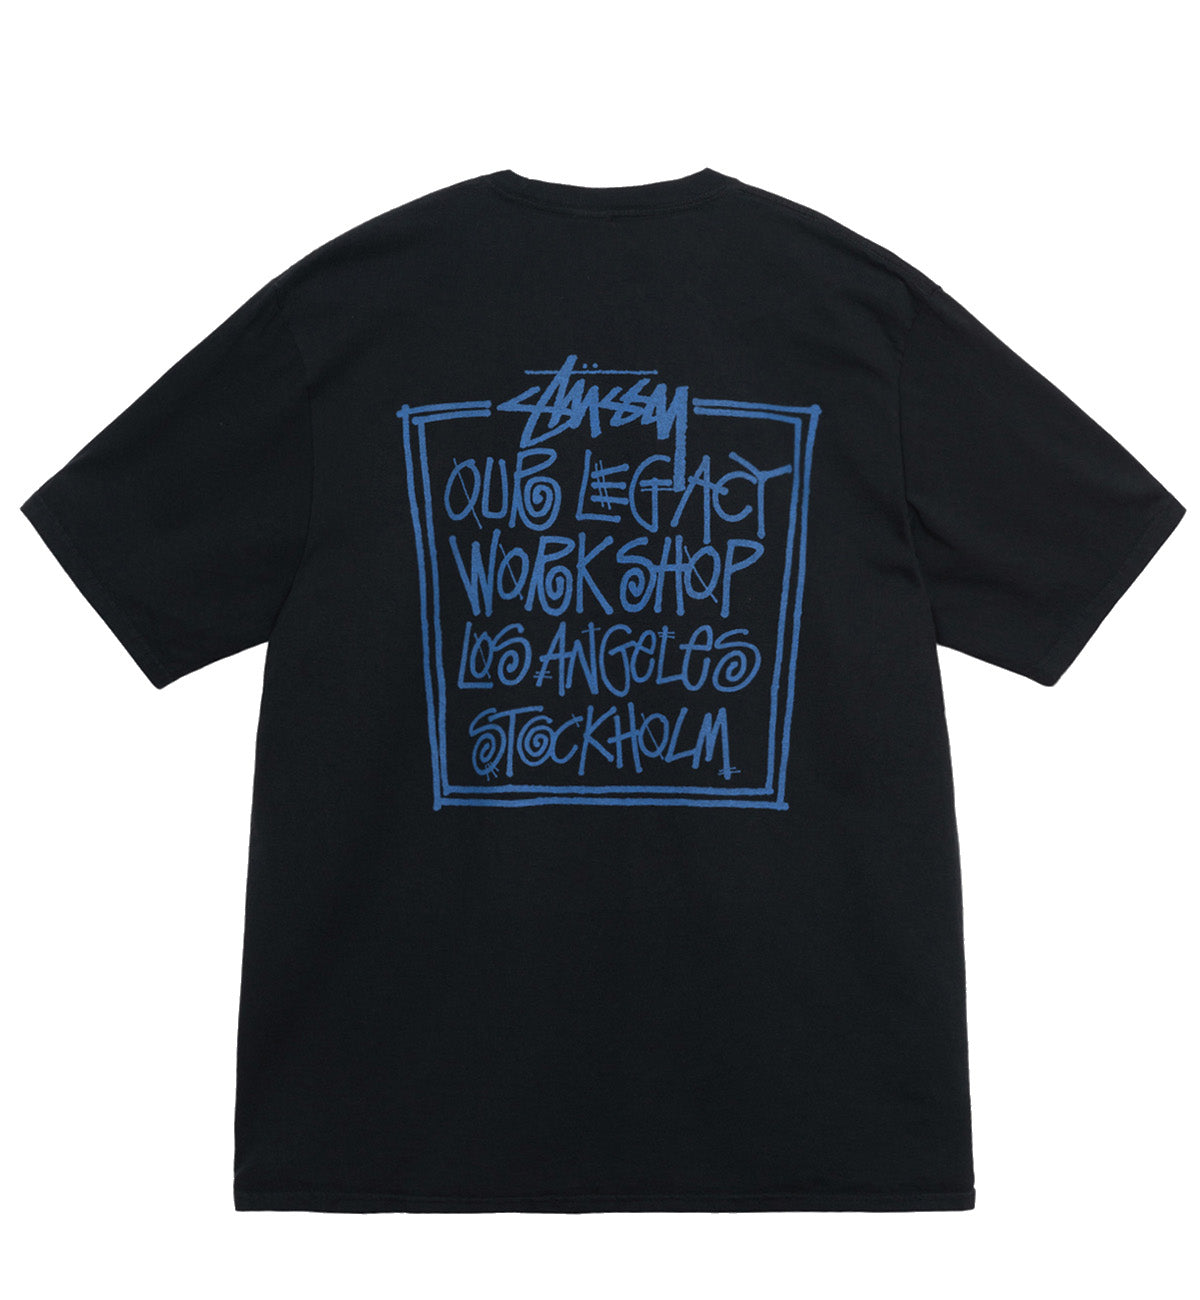 Stussy Our Legacy Frame Pigment Dyed Tee (Black)